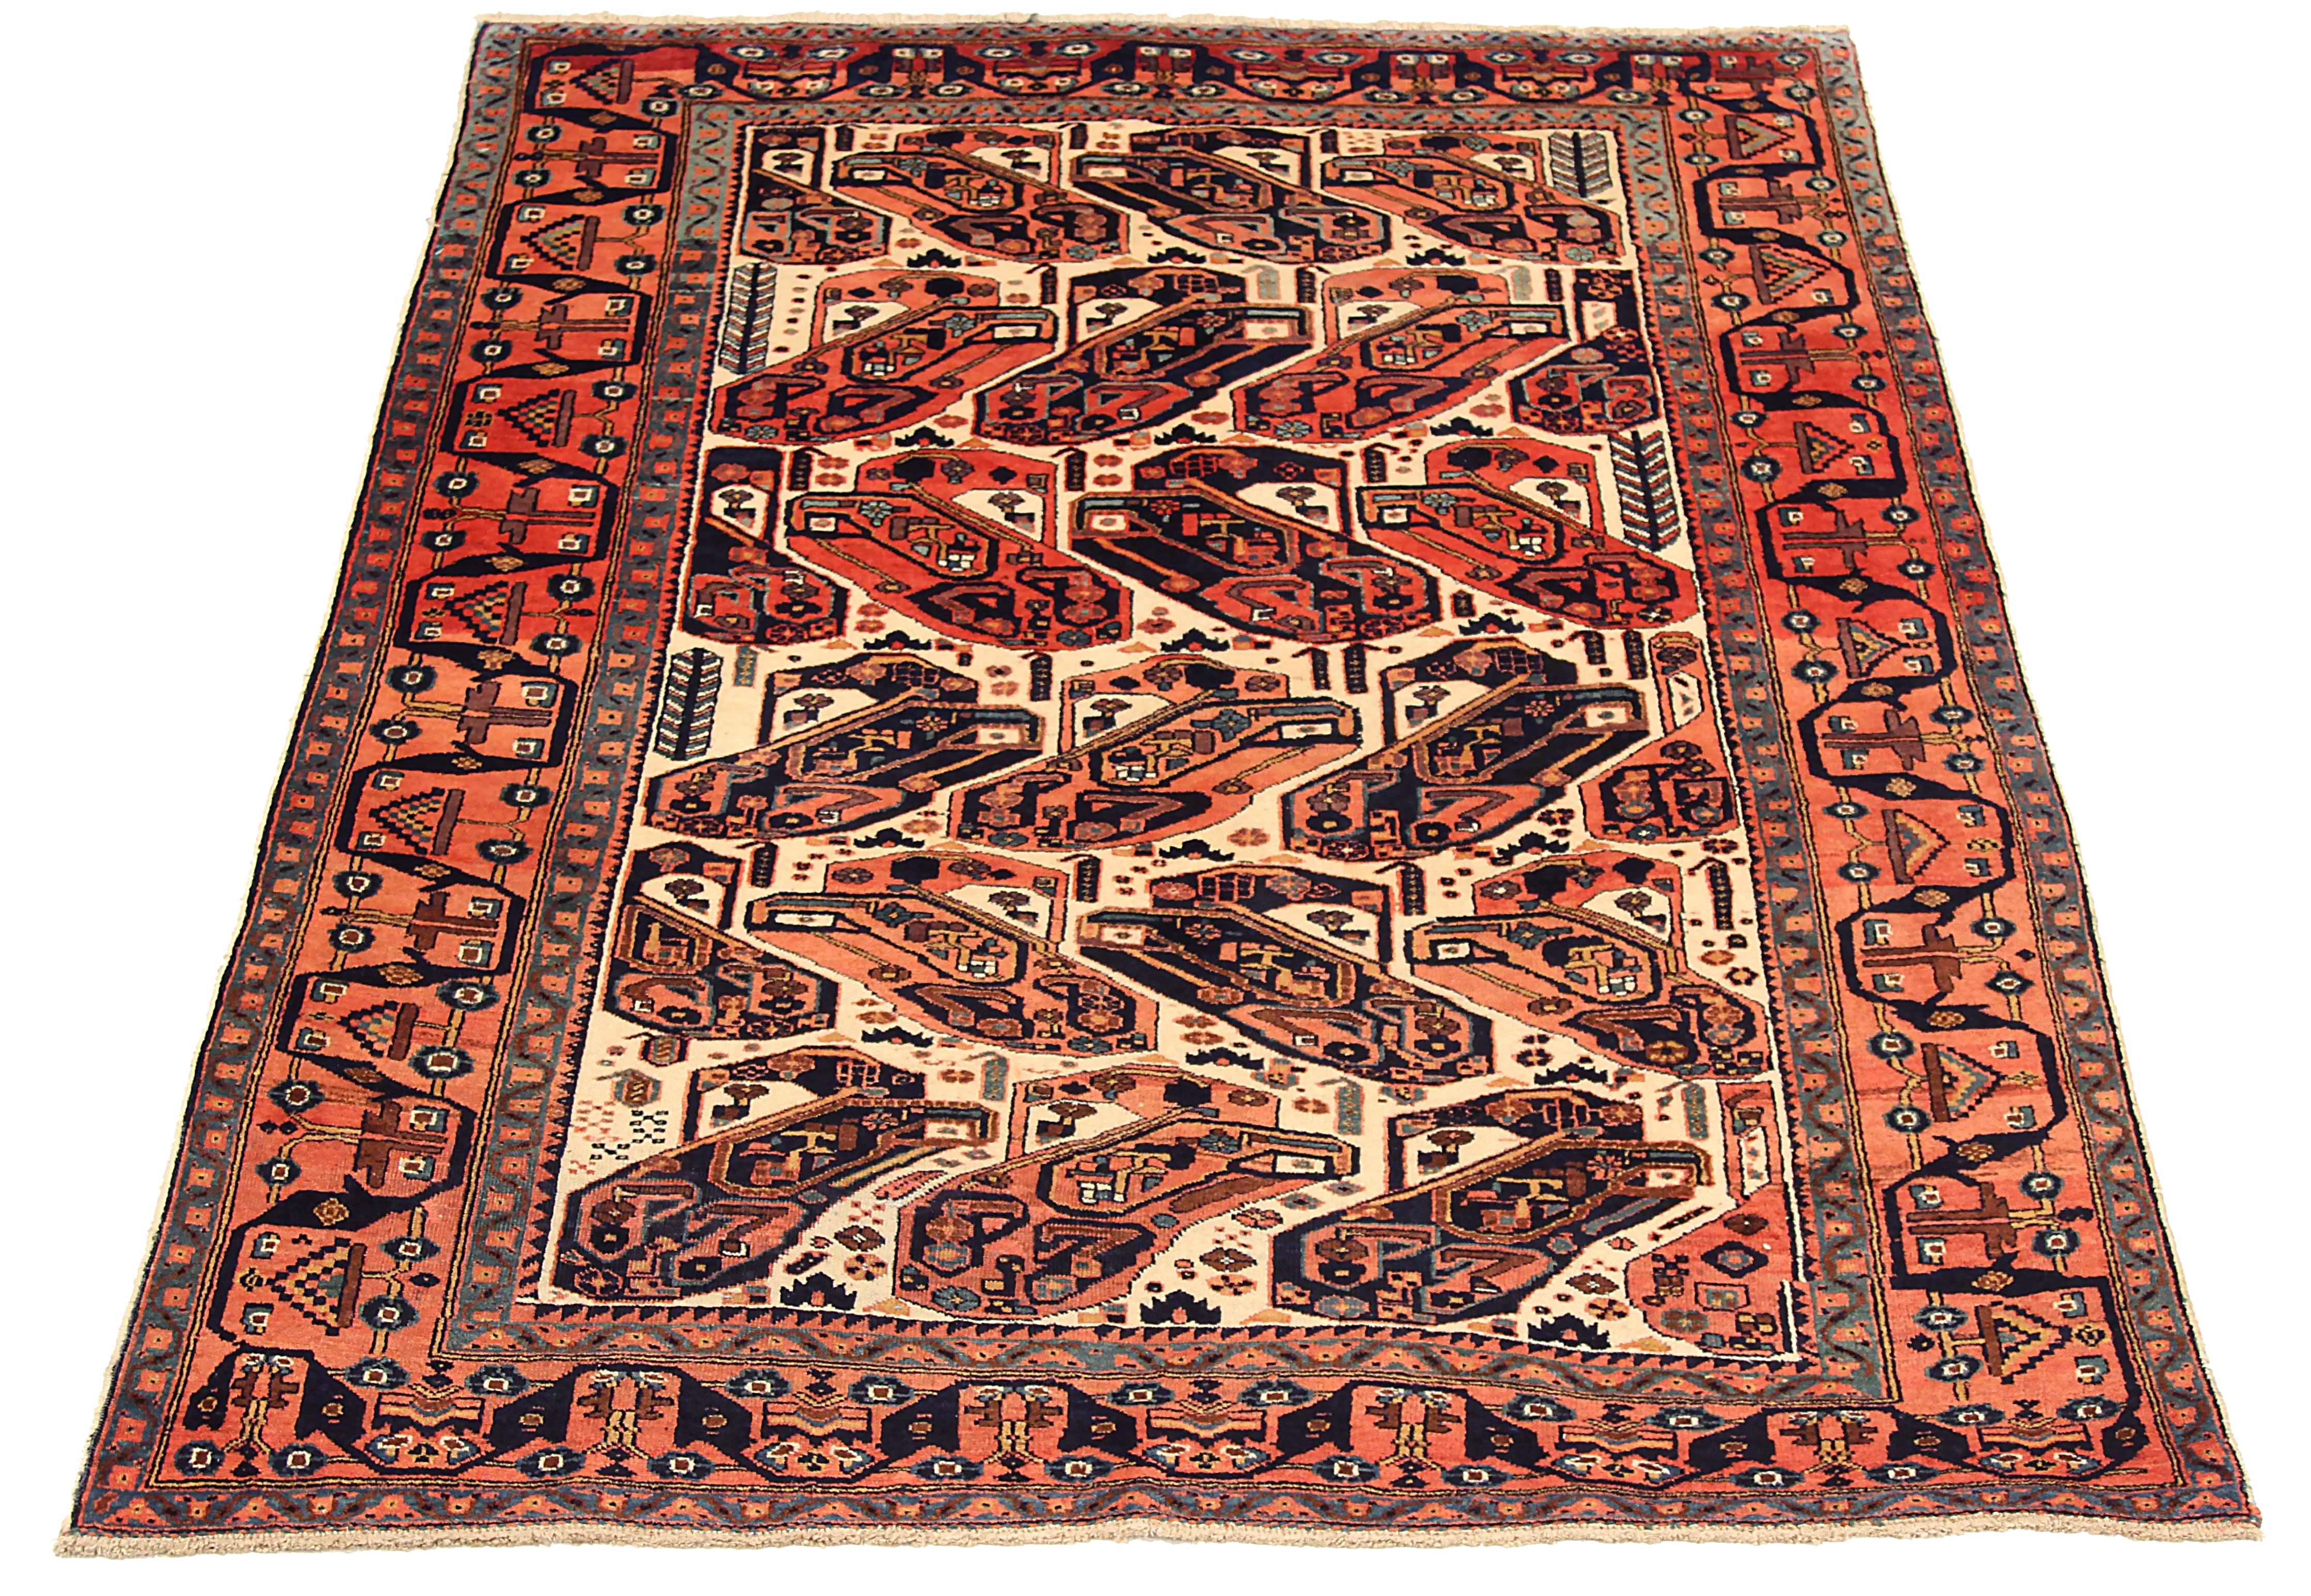 Antique Persian area rug handwoven from the finest sheep’s wool. It’s colored with all-natural vegetable dyes that are safe for humans and pets. It’s a traditional Isfahan design handwoven by expert artisans. It’s a lovely area rug that can be